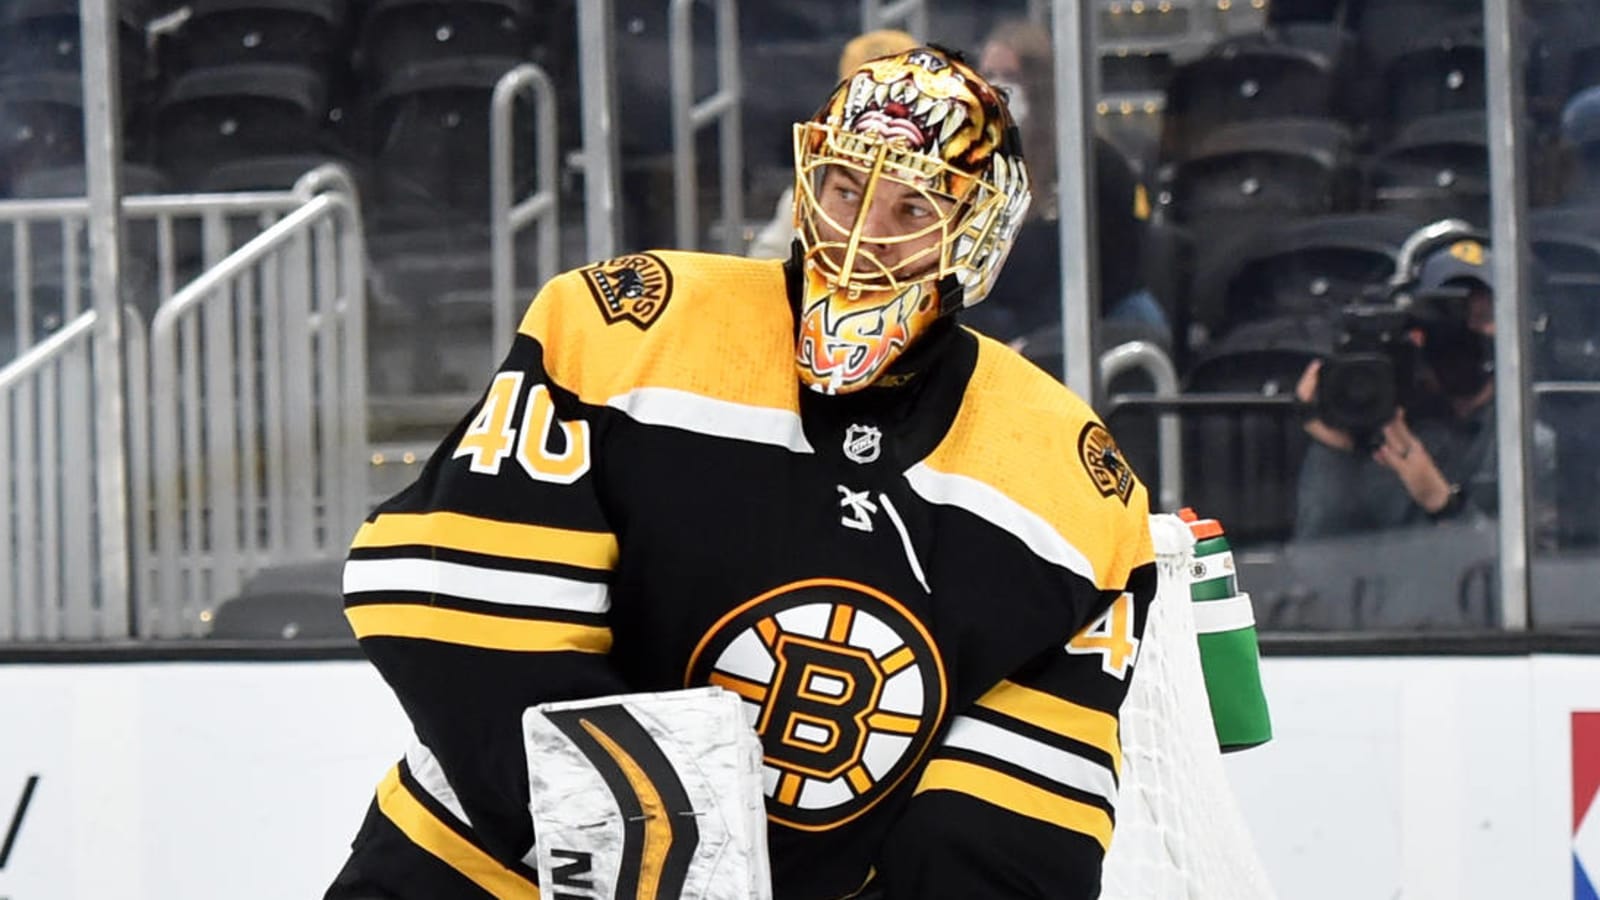 Rask has spot on Team Finland for Olympics if he wants it